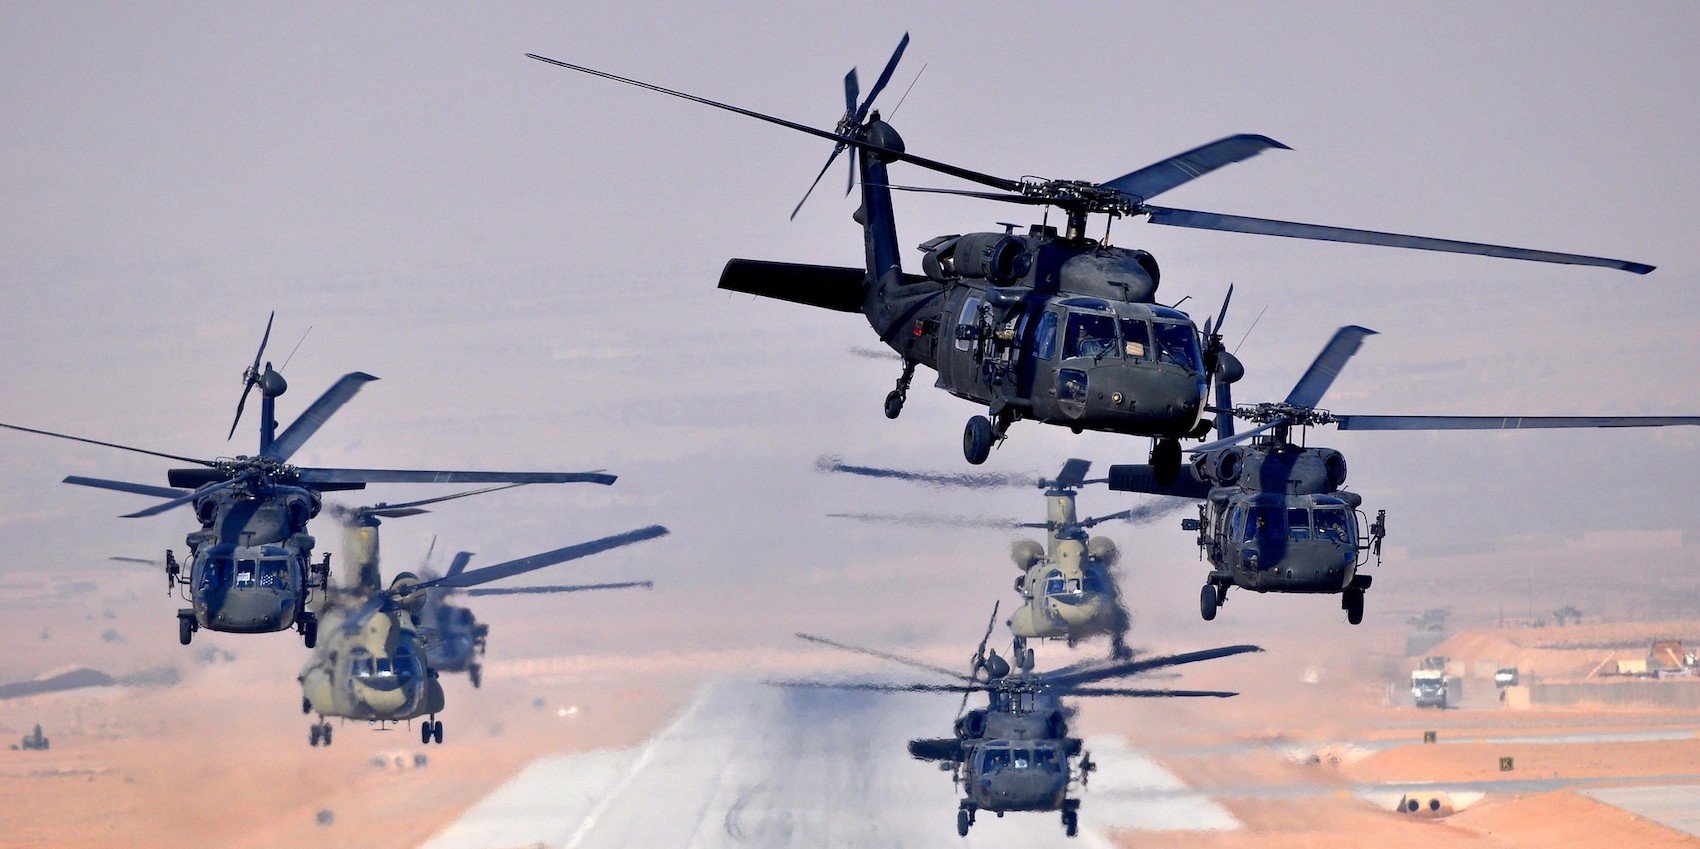 Six UH-60L Black Hawks and two CH-47F Chinooks, assigned to Task Force Brawler, 4th Battalion, 3rd Aviation Regiment, Task Force Falcon, simultaneously launch a daytime missionfrom Multinational Base Tarin Kowt